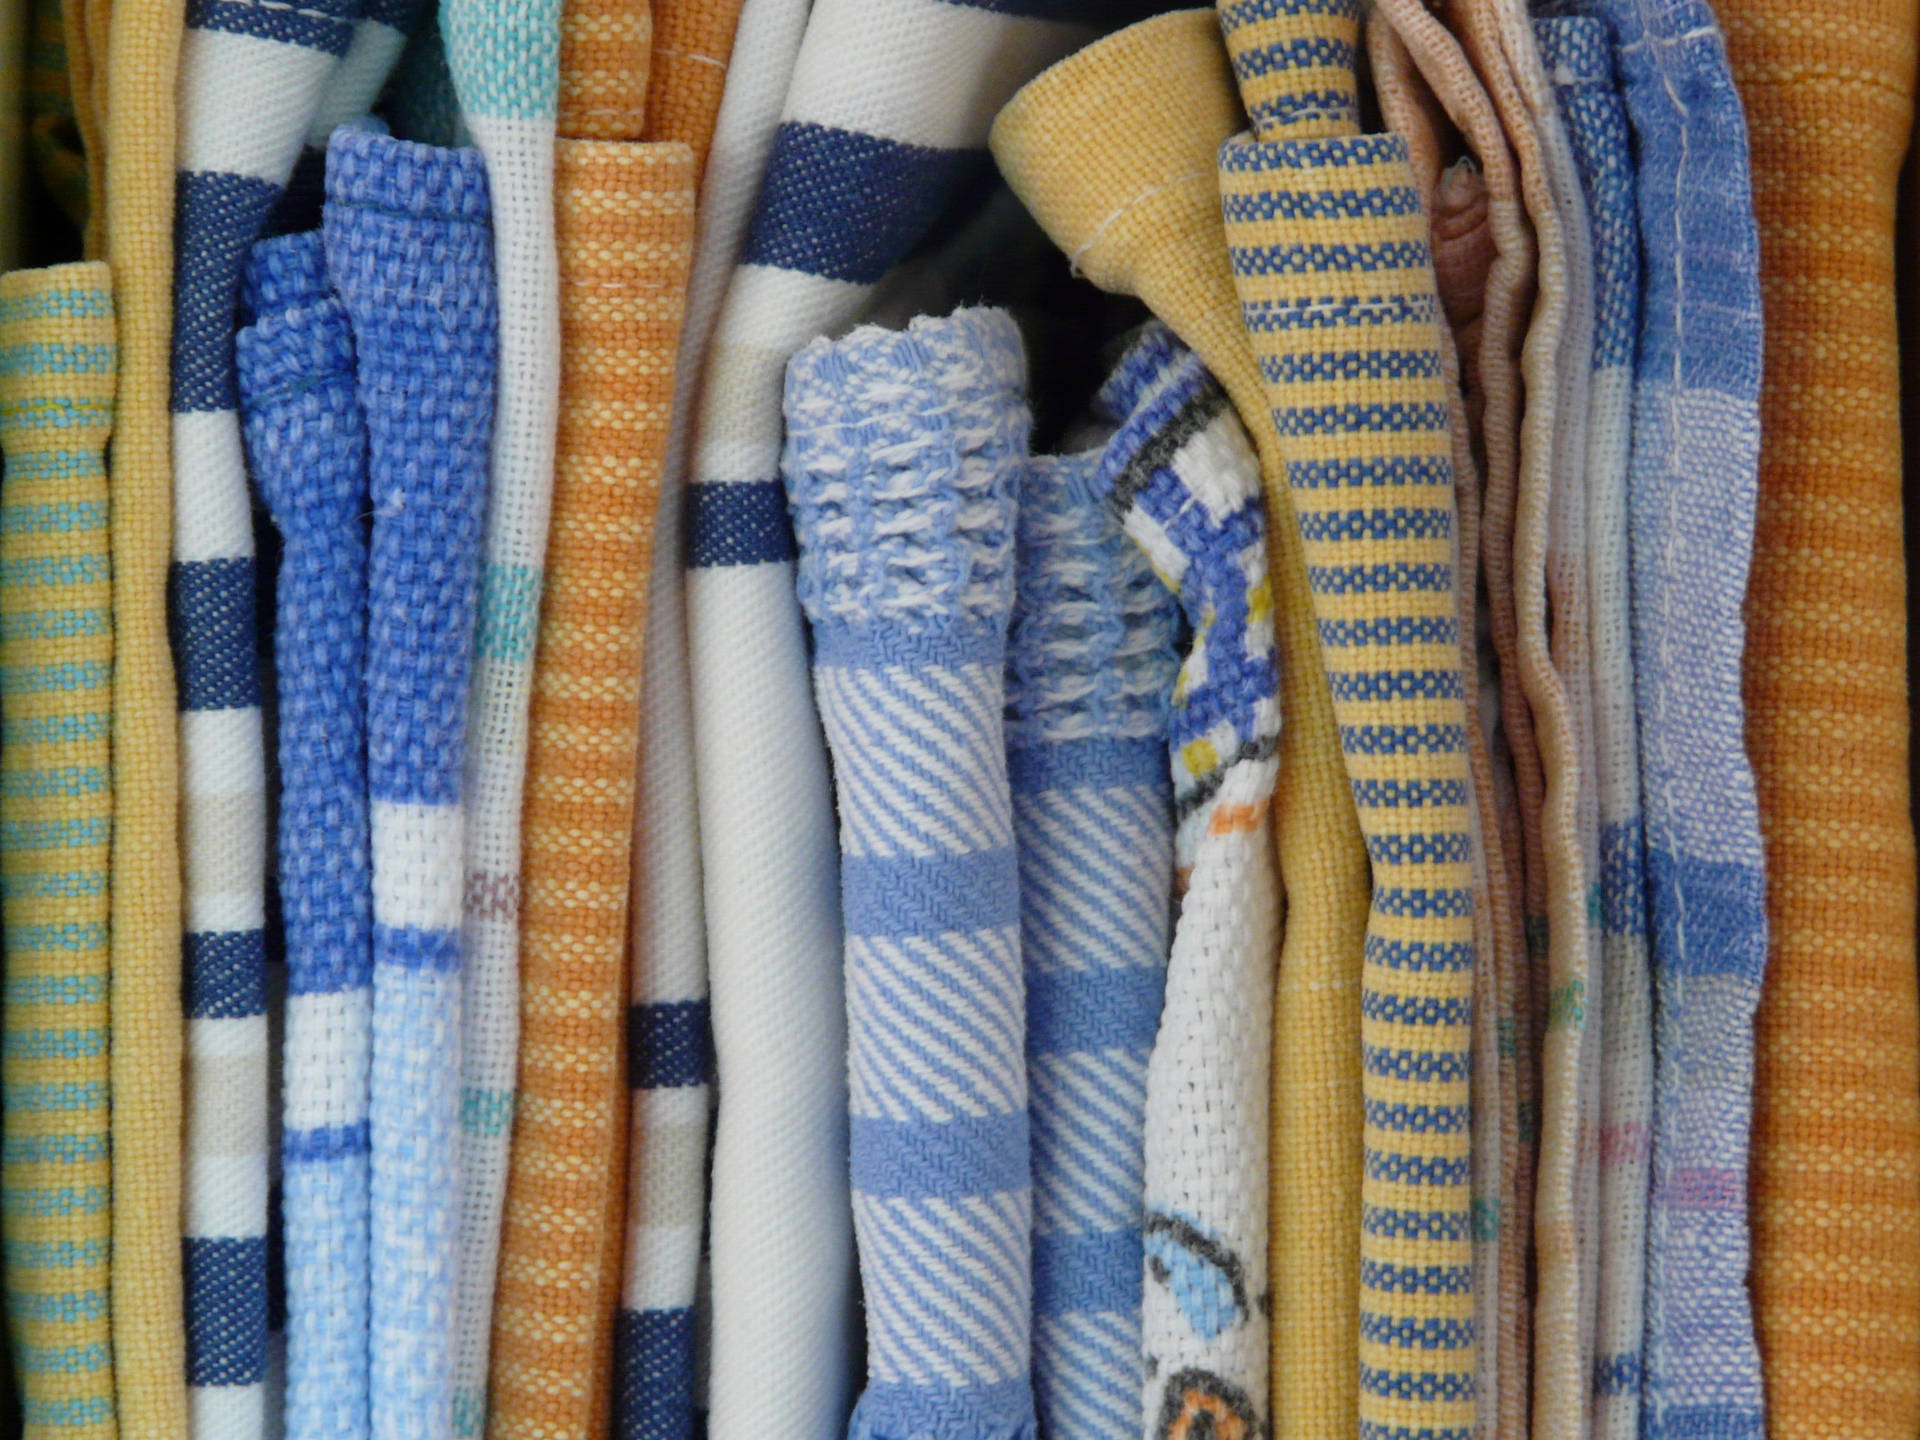 Folded Clothes With Prints Close-Up Wallpaper